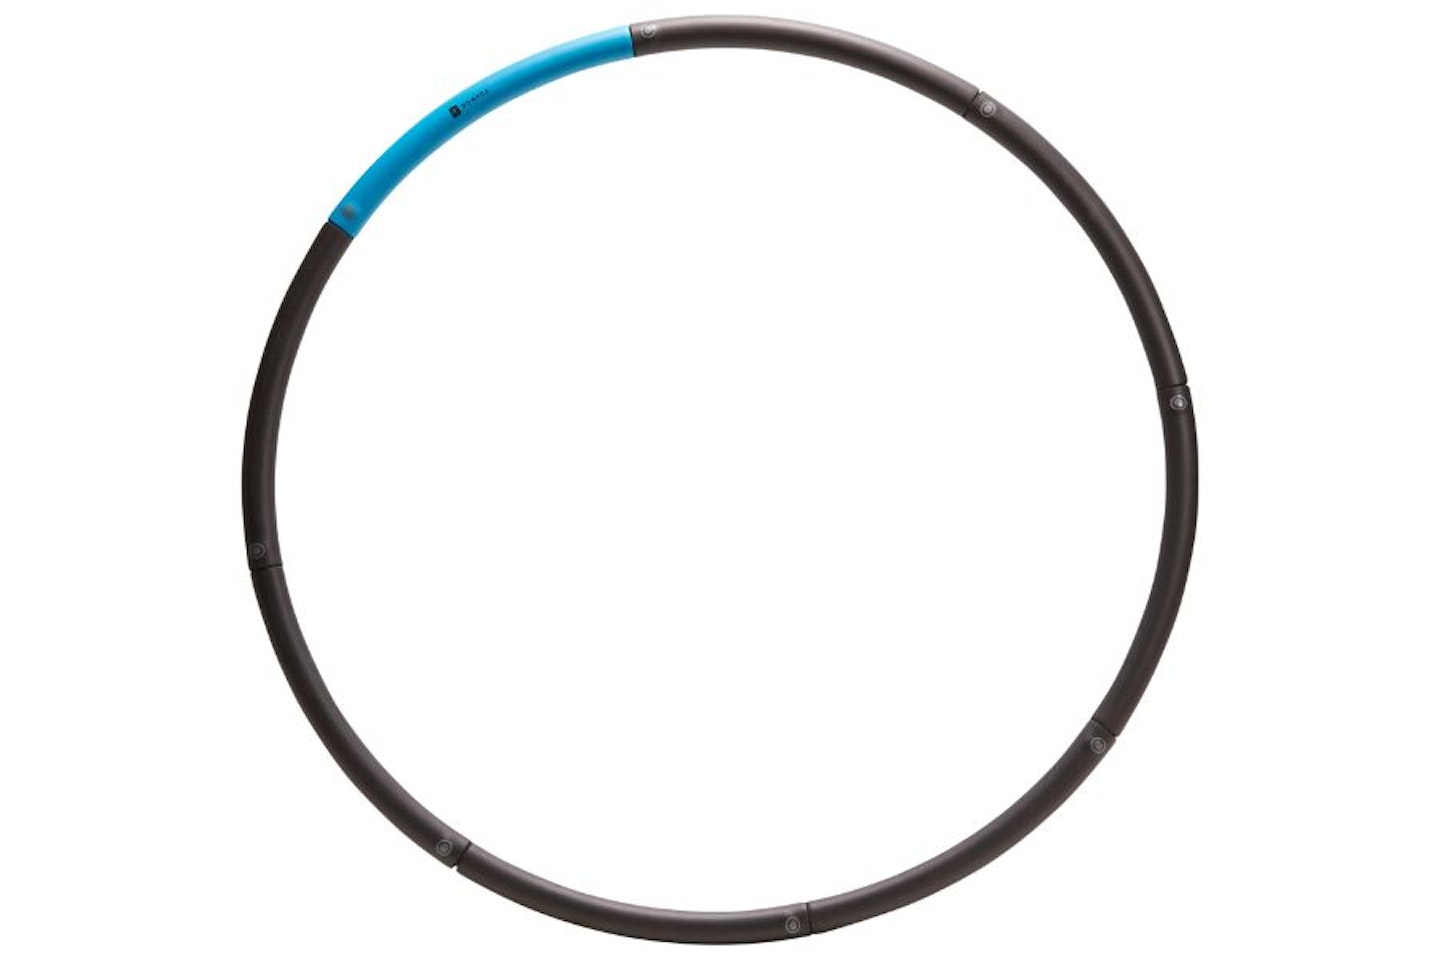 Domyos Fitness Weighted Hoop